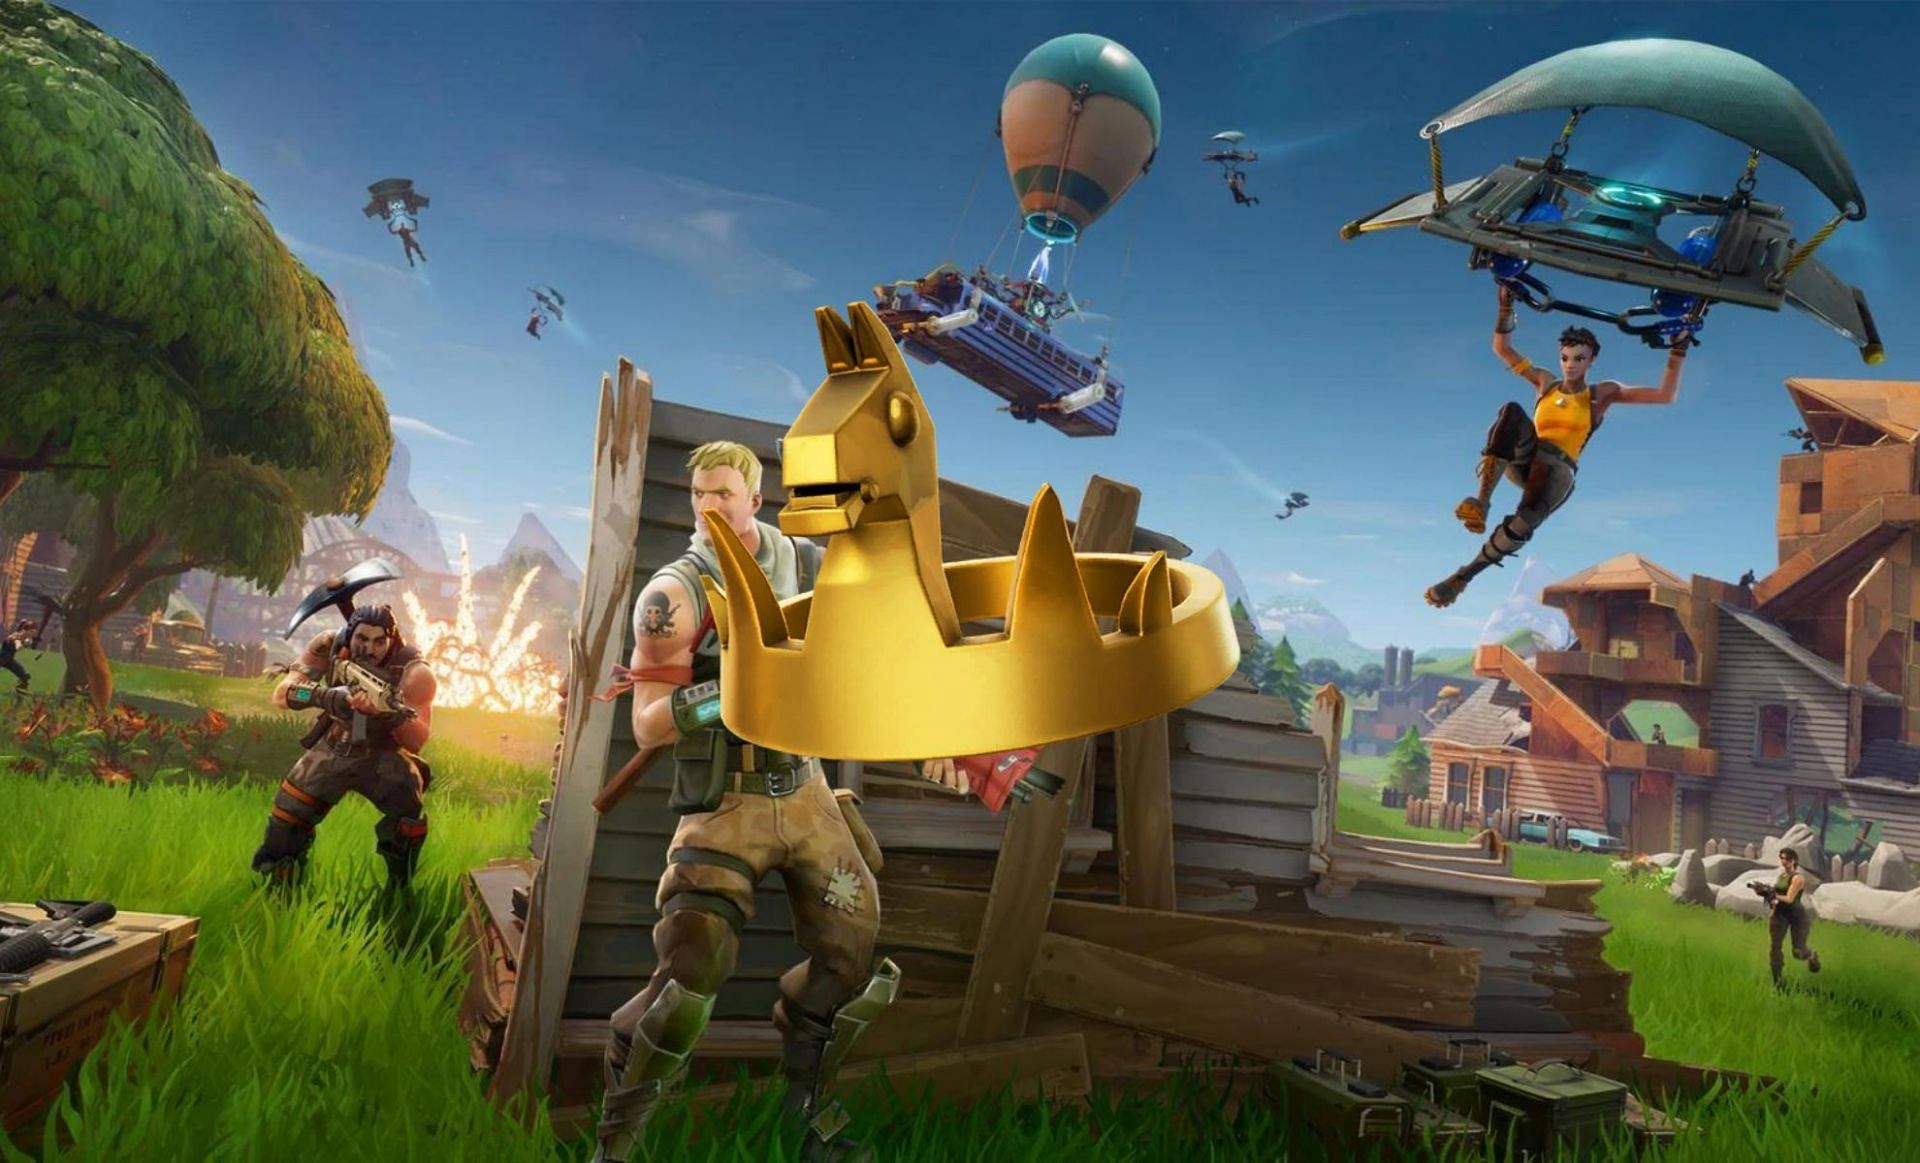 Victory Crown (Images via Fortnite Wiki)